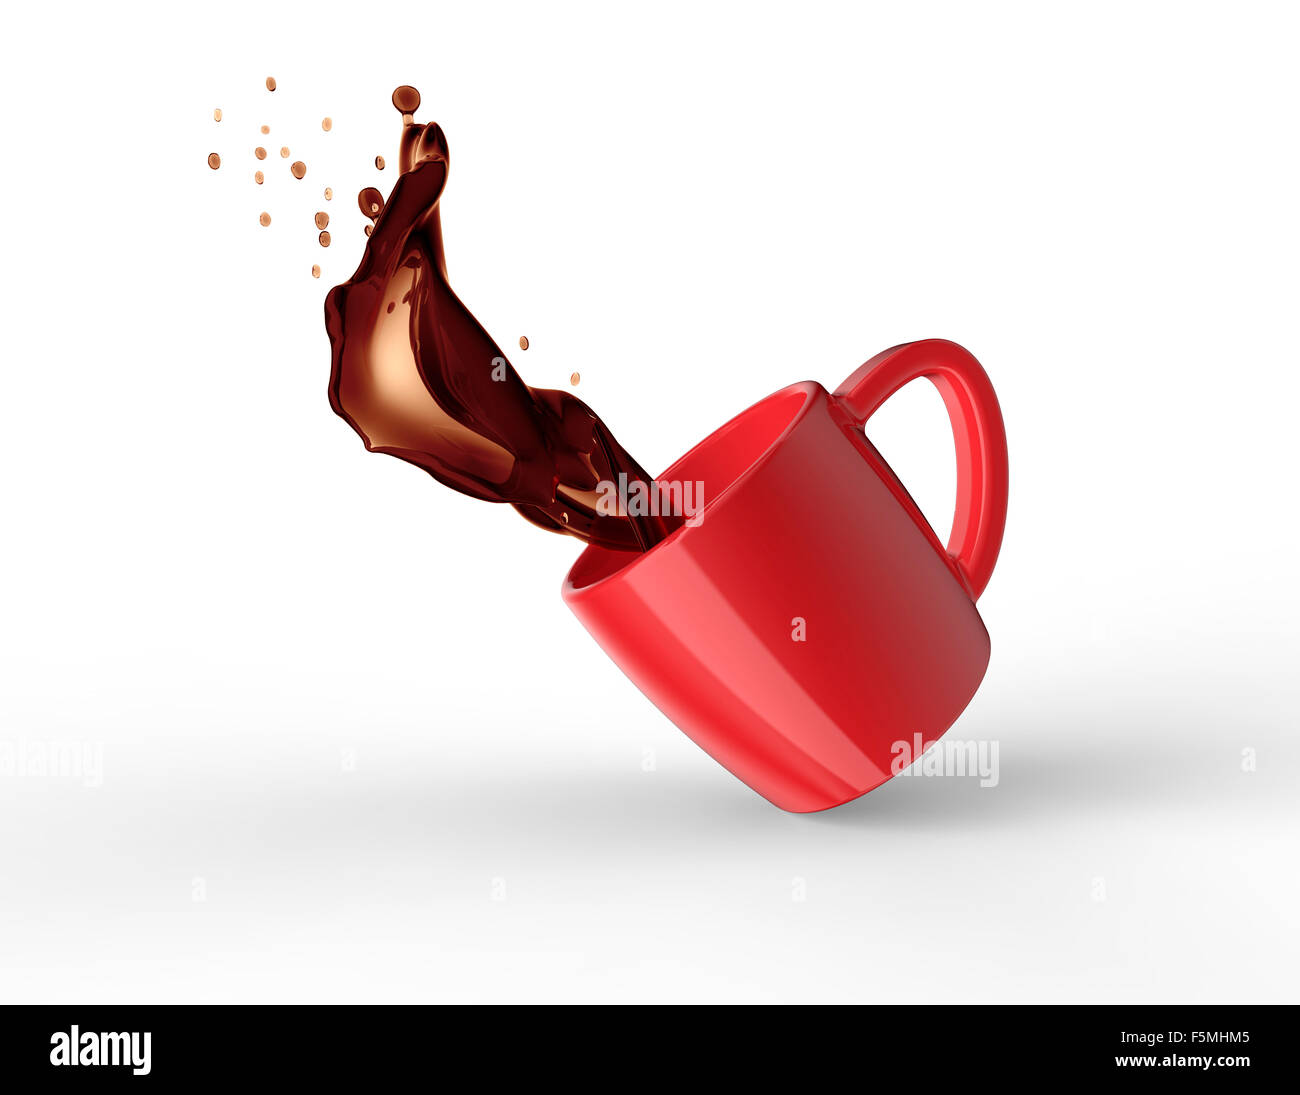 Coffee spill Cut Out Stock Images & Pictures - Alamy